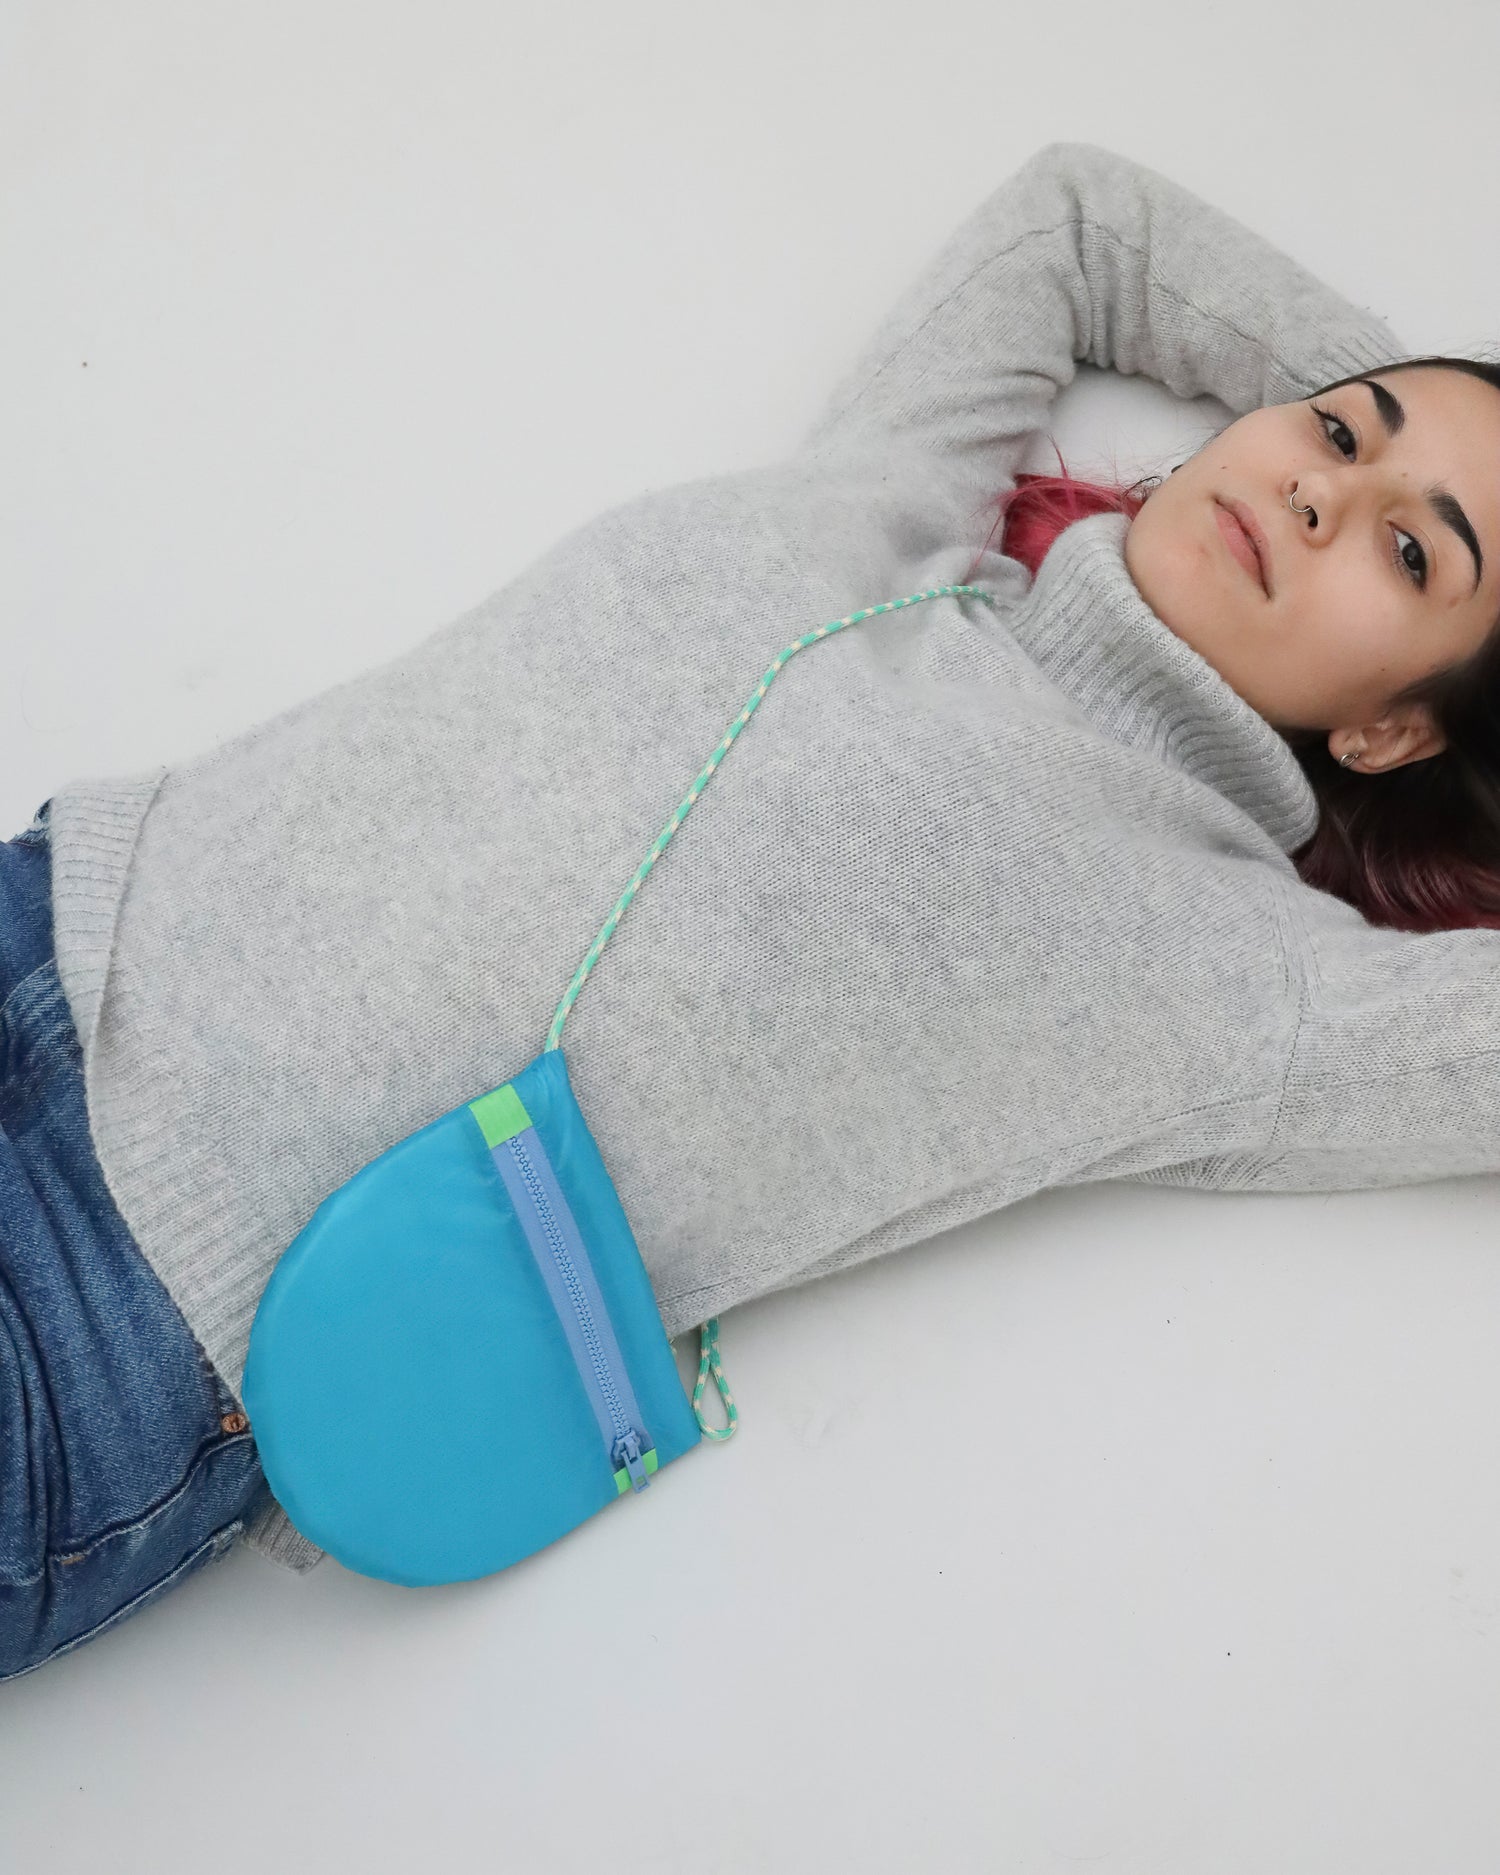 Model wearing crossbody bag in turquoise and green made from recycled rip stop nylon